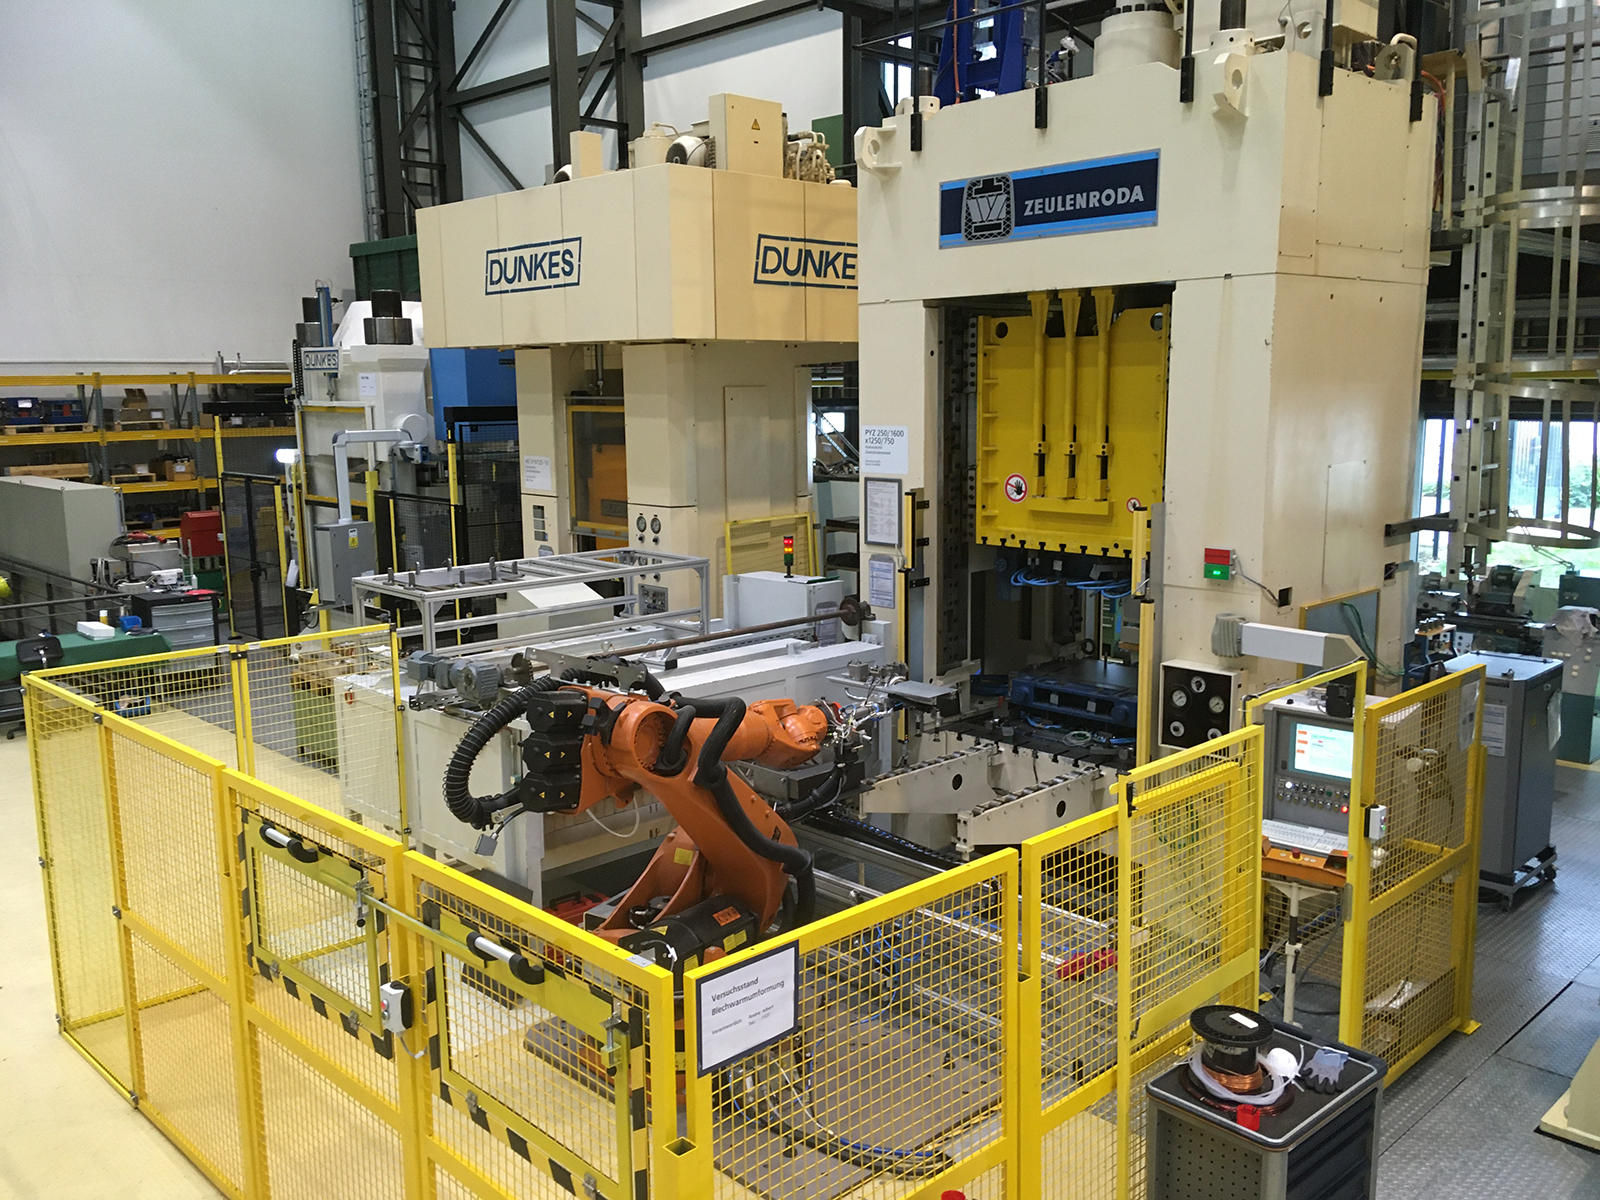 Test rig for hot sheet metal forming at Fraunhofer IWU, including oven, press, and robot.